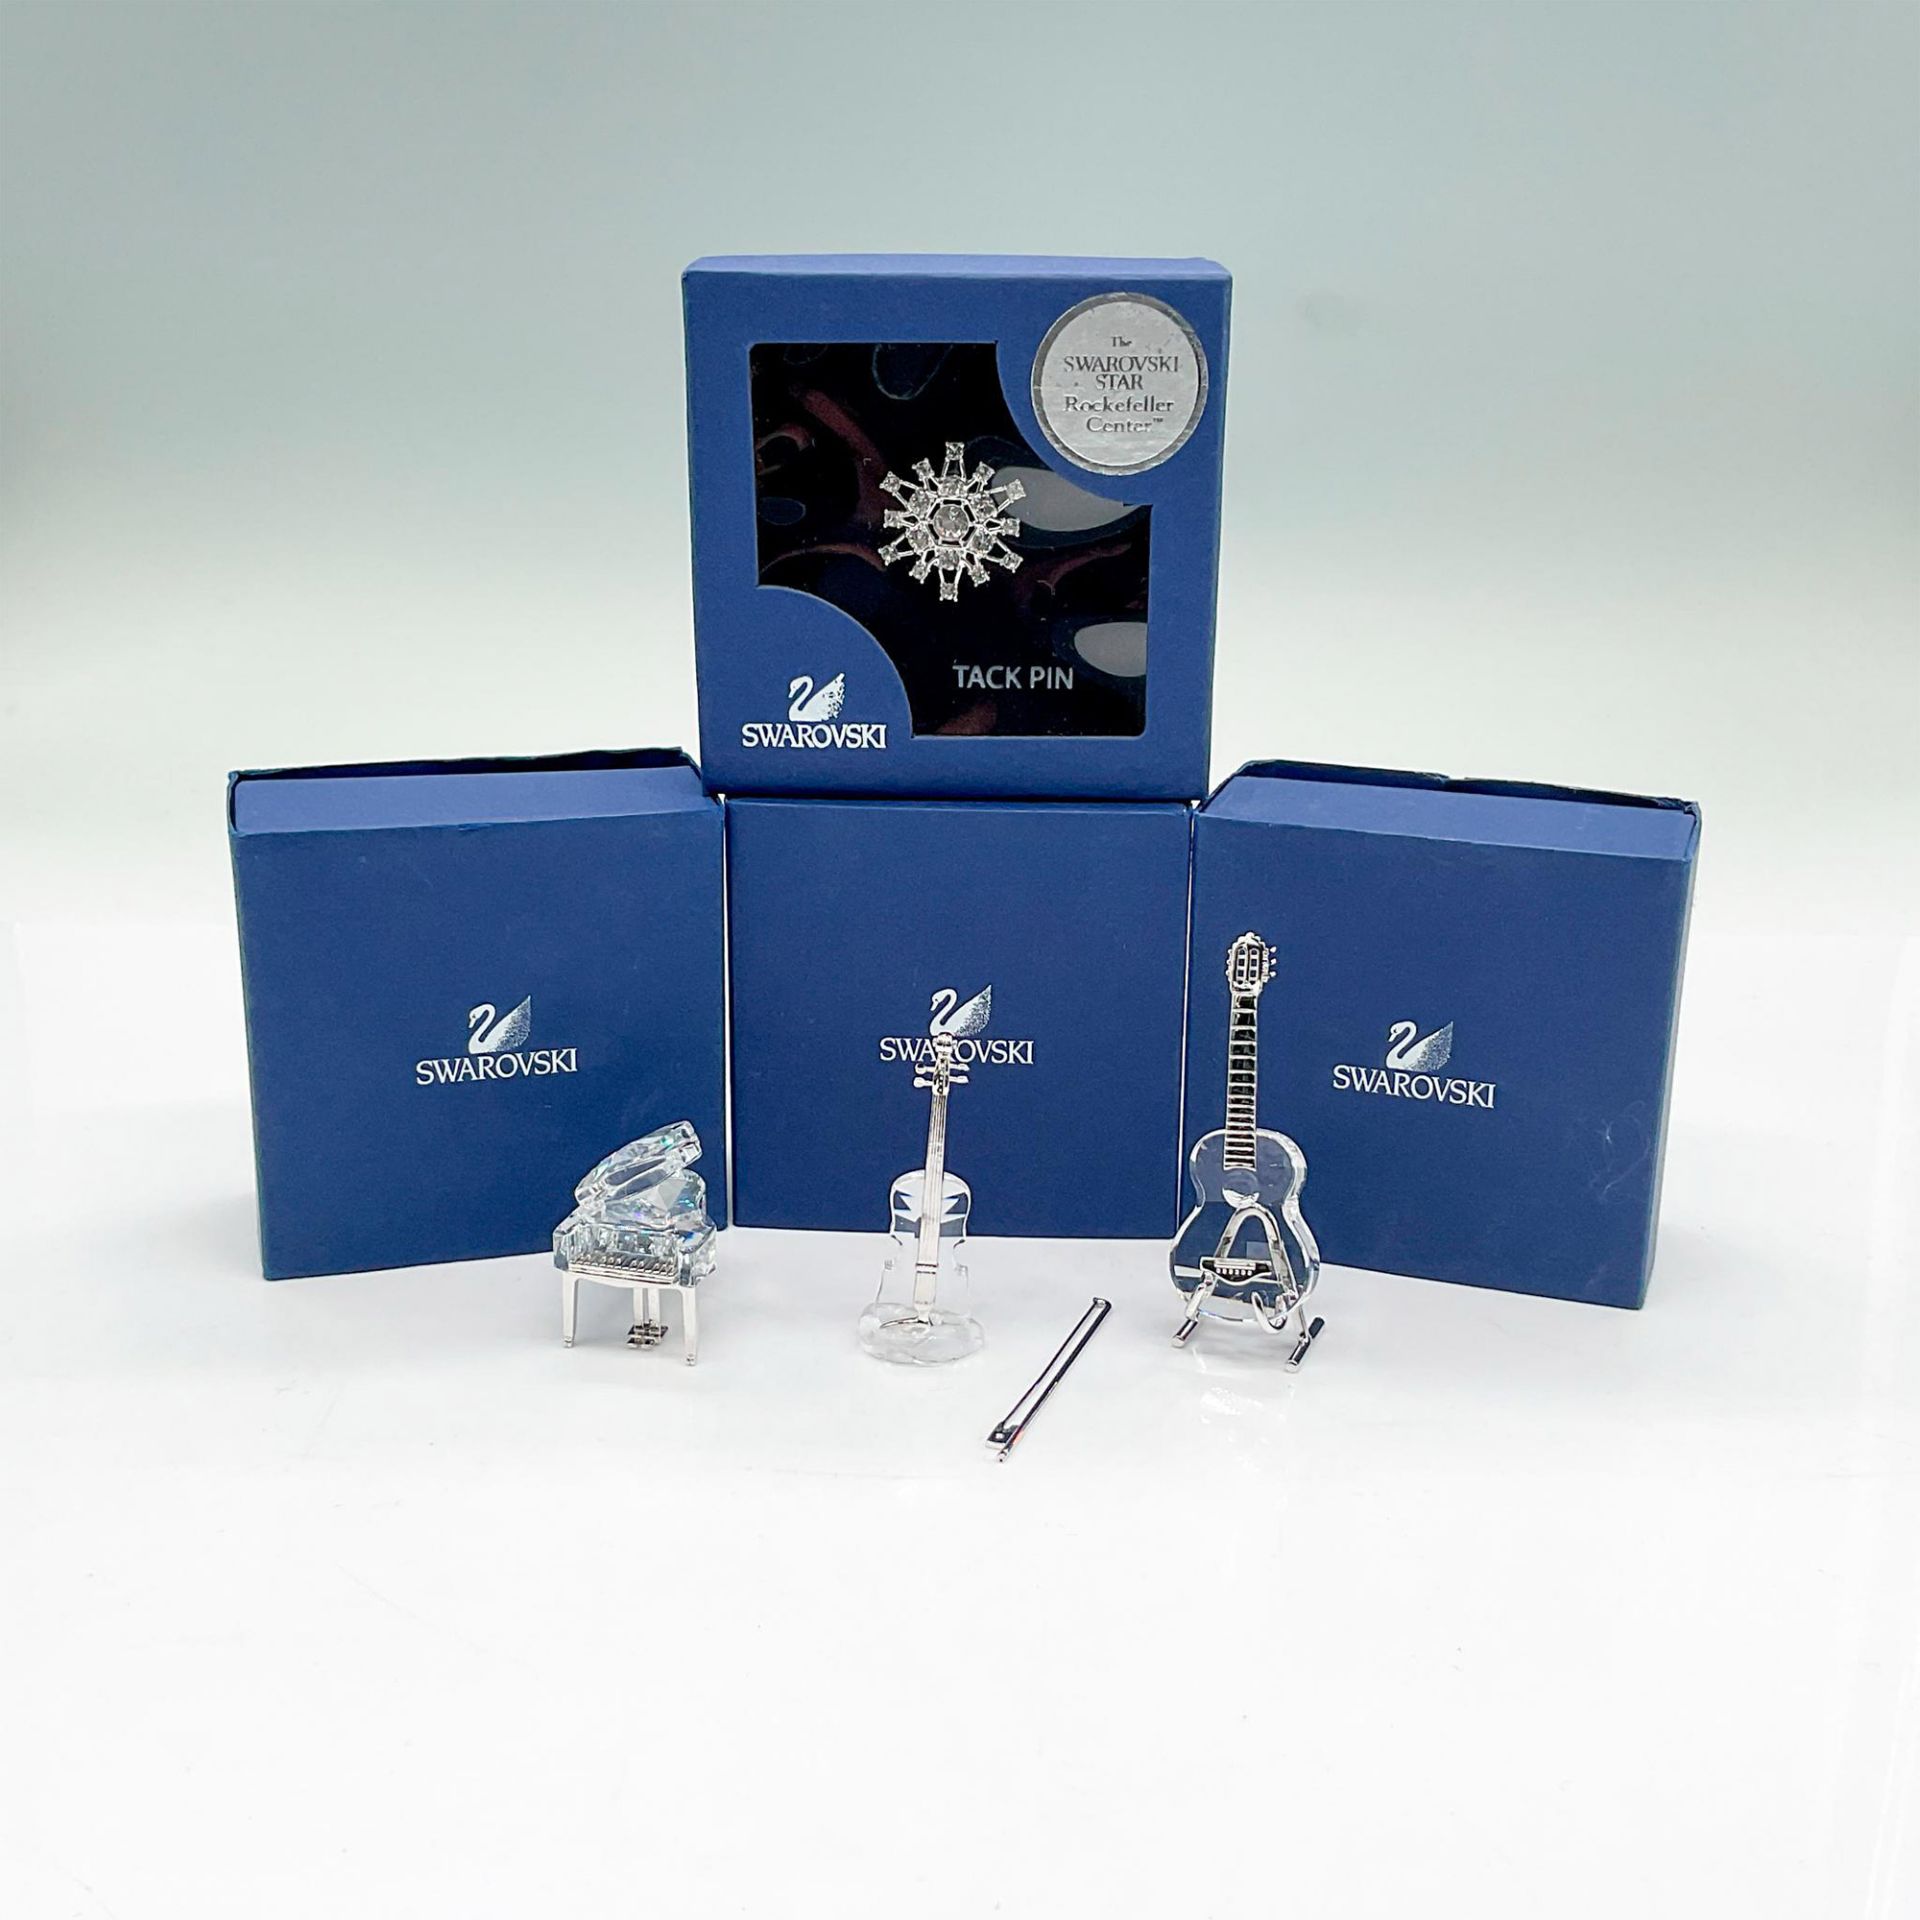 4pc Swarovski Crystal Figurines, Musical Instruments + Pin - Image 6 of 6